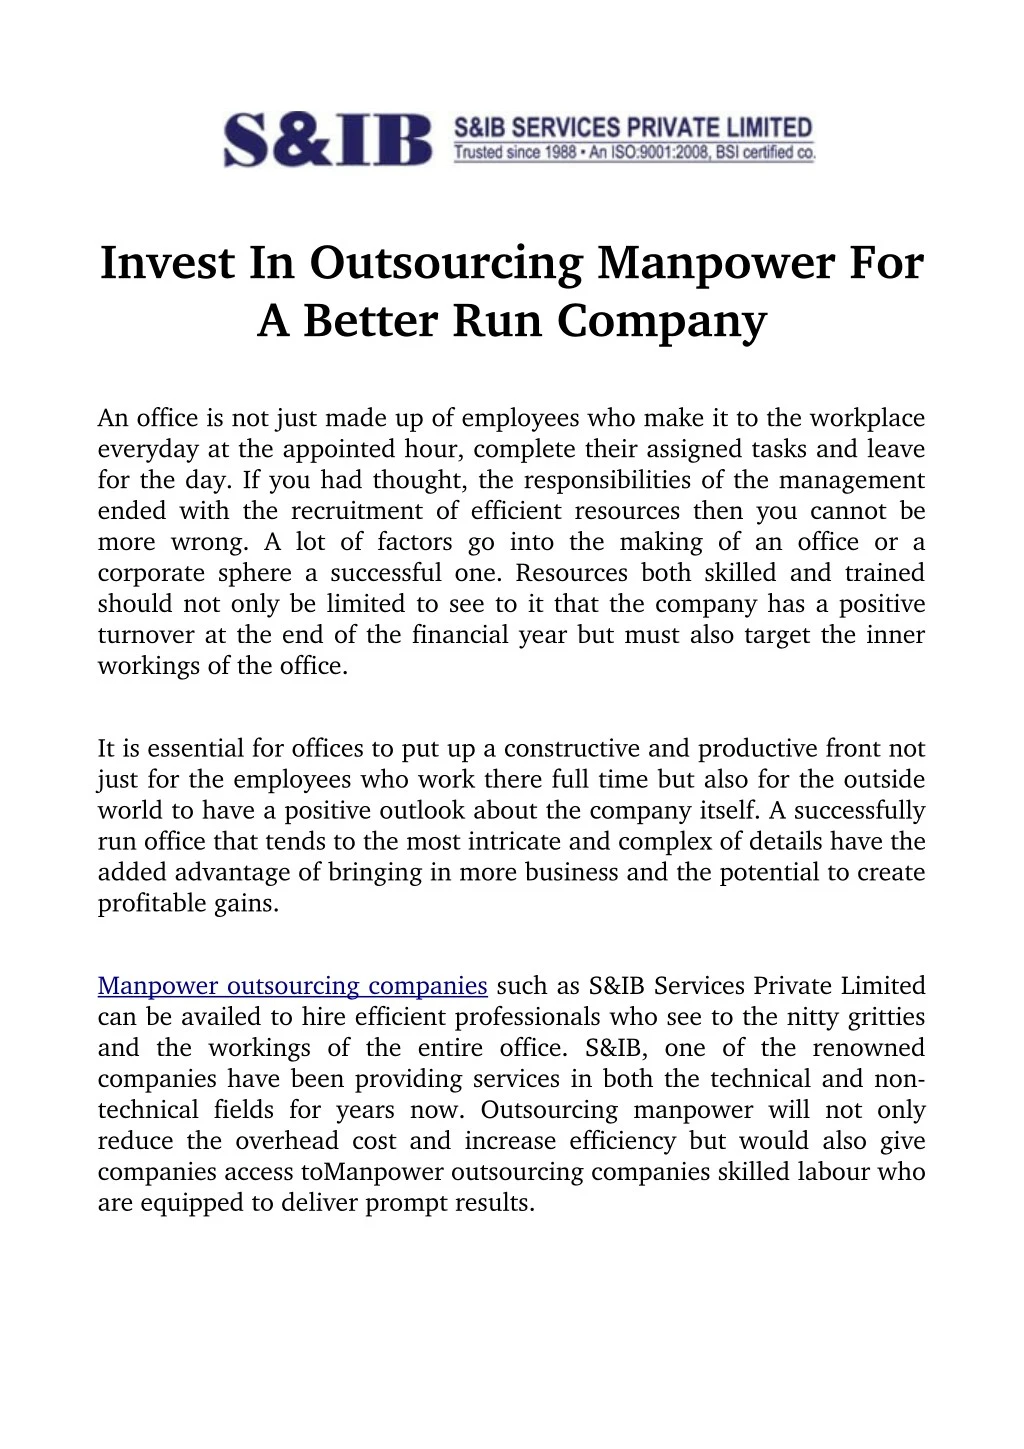 invest in outsourcing manpower for a better